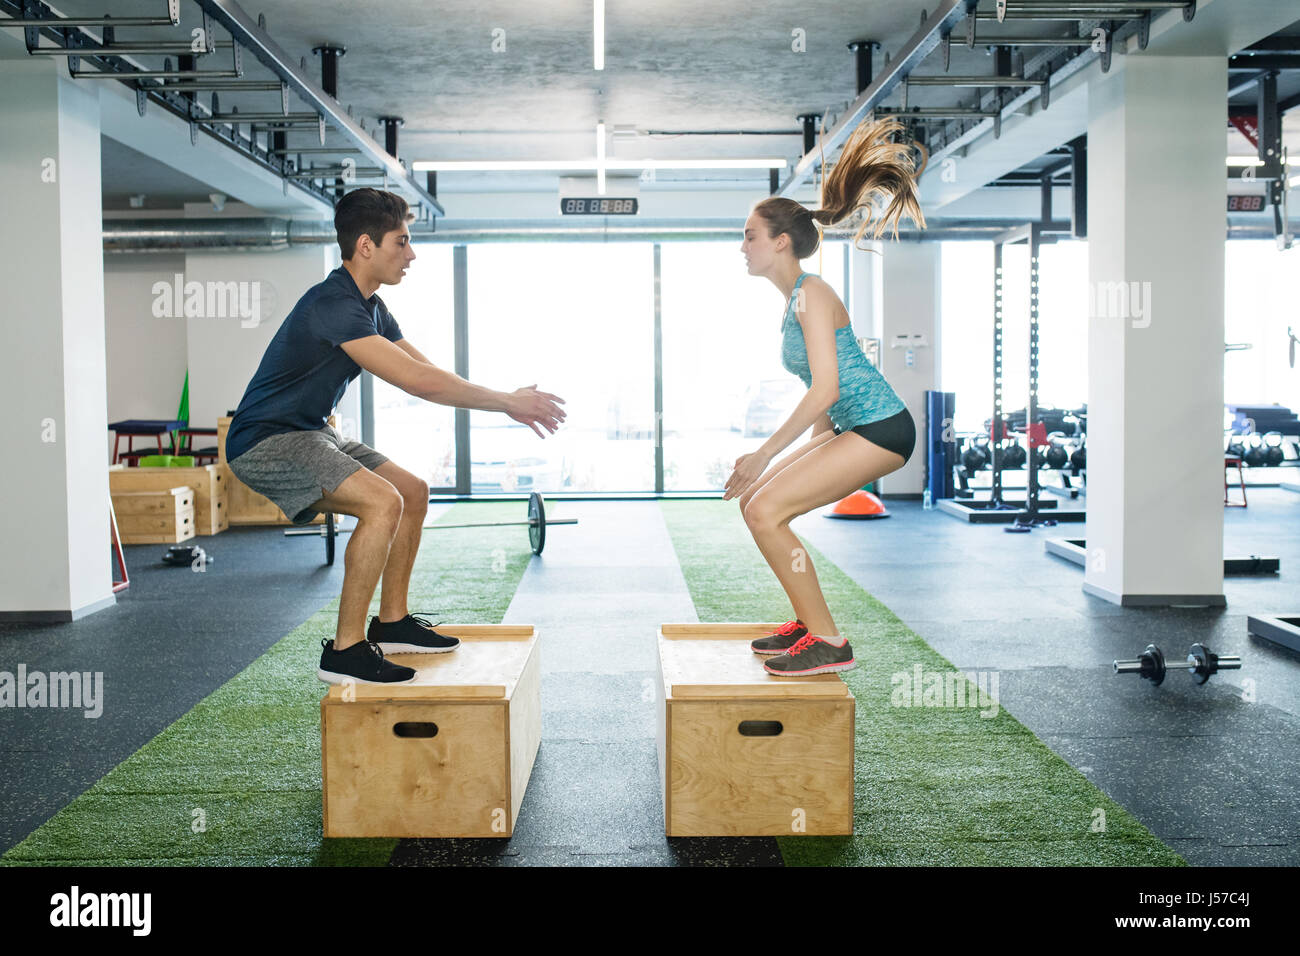 Young fit couple exercising in gym, doing box jumps. Stock Photo